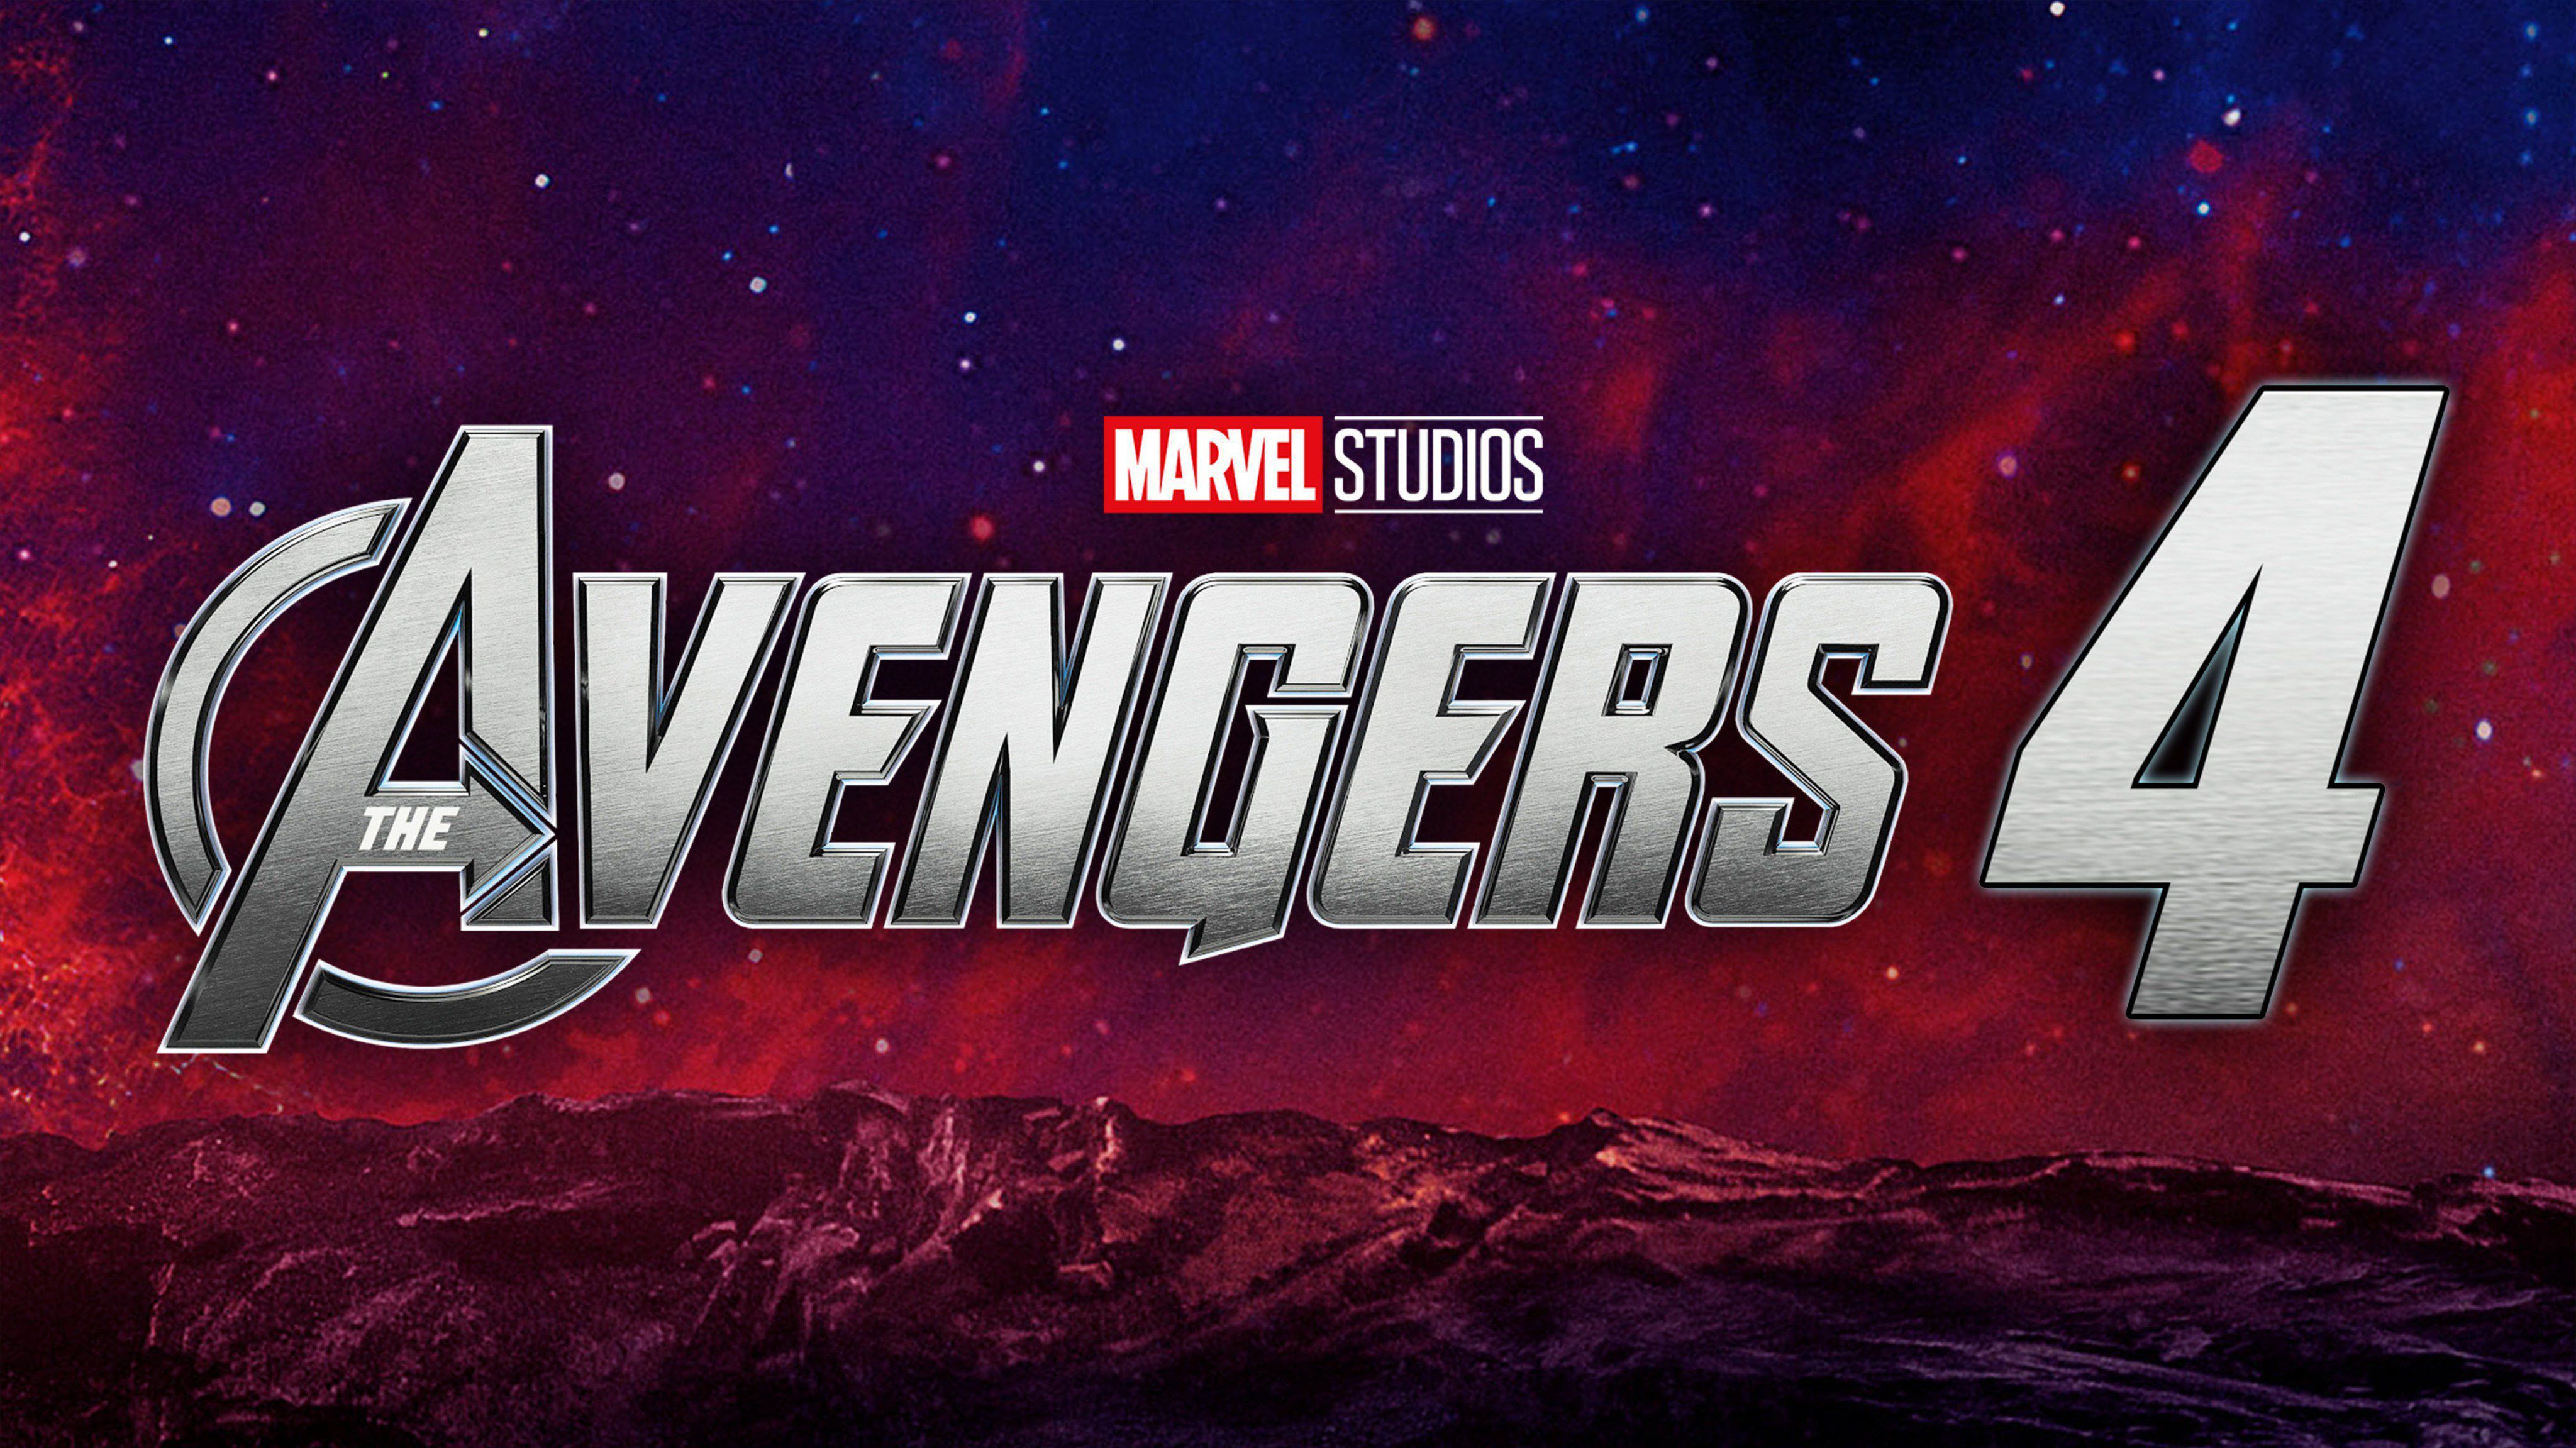 Free download 4k Marvel Studios Avengers Endgame Wallpapers iPhone Android  and [4096x2303] for your Desktop, Mobile & Tablet | Explore 19+ Marvel  Studios Desktop Wallpapers | Vlad Studios Desktop Wallpaper, Trustworth  Studios